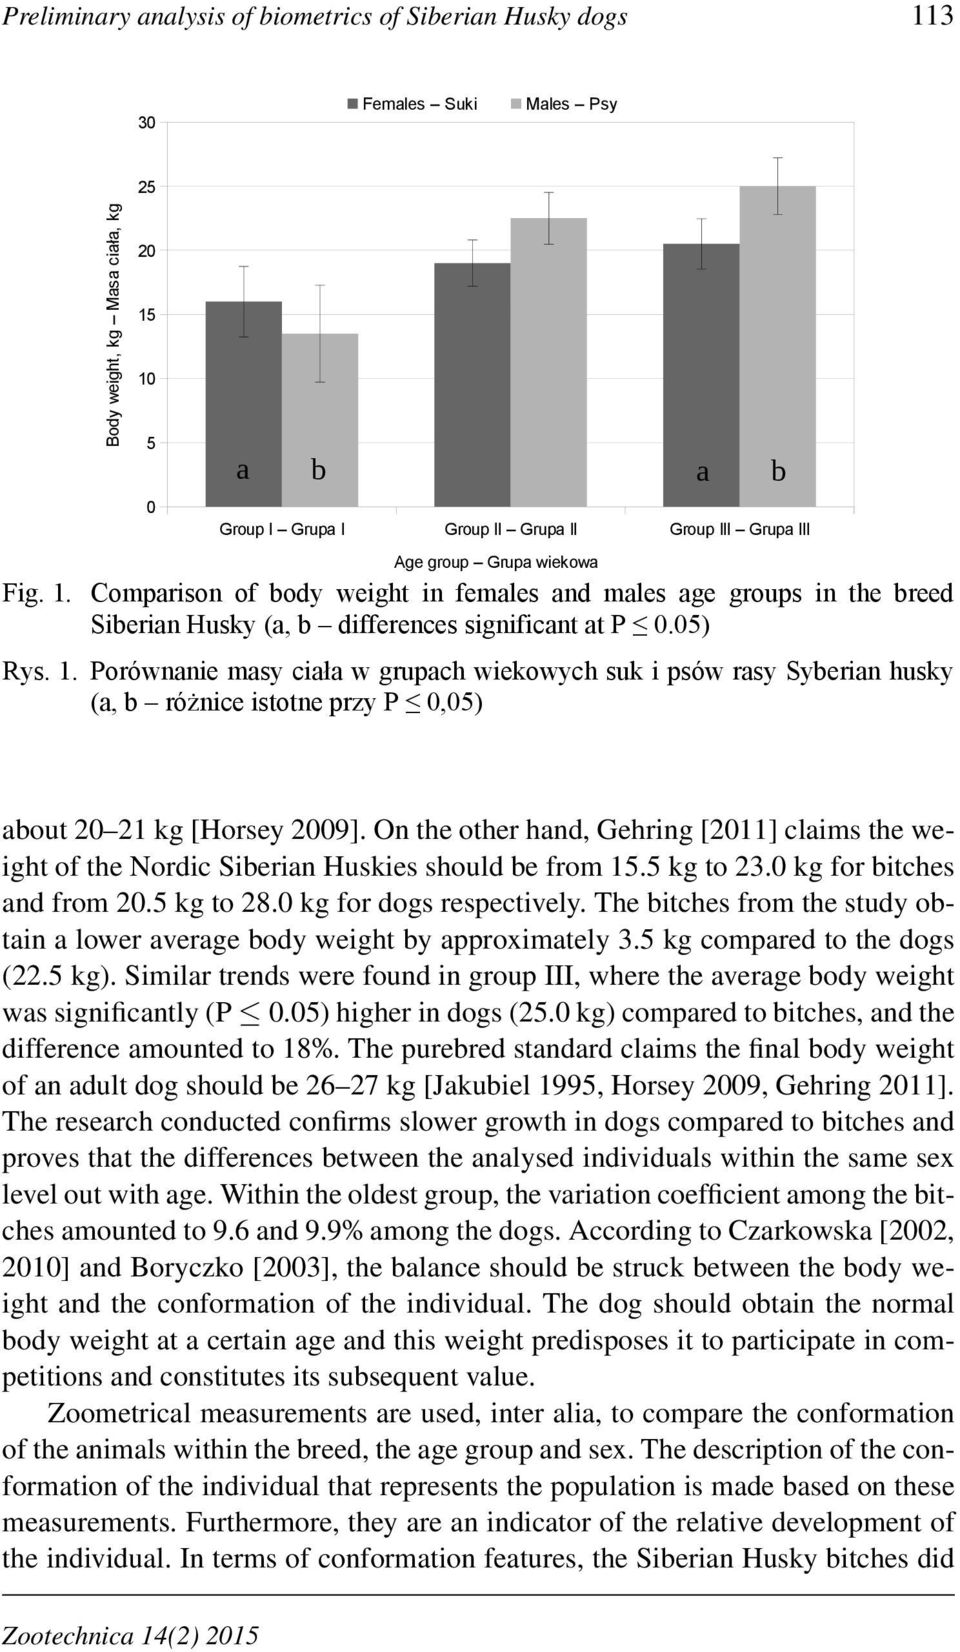 On the other hand, Gehring [211] claims the weight of the Nordic Siberian Huskies should be from 15.5 kg to 23. kg for bitches and from 2.5 kg to 28. kg for dogs respectively.